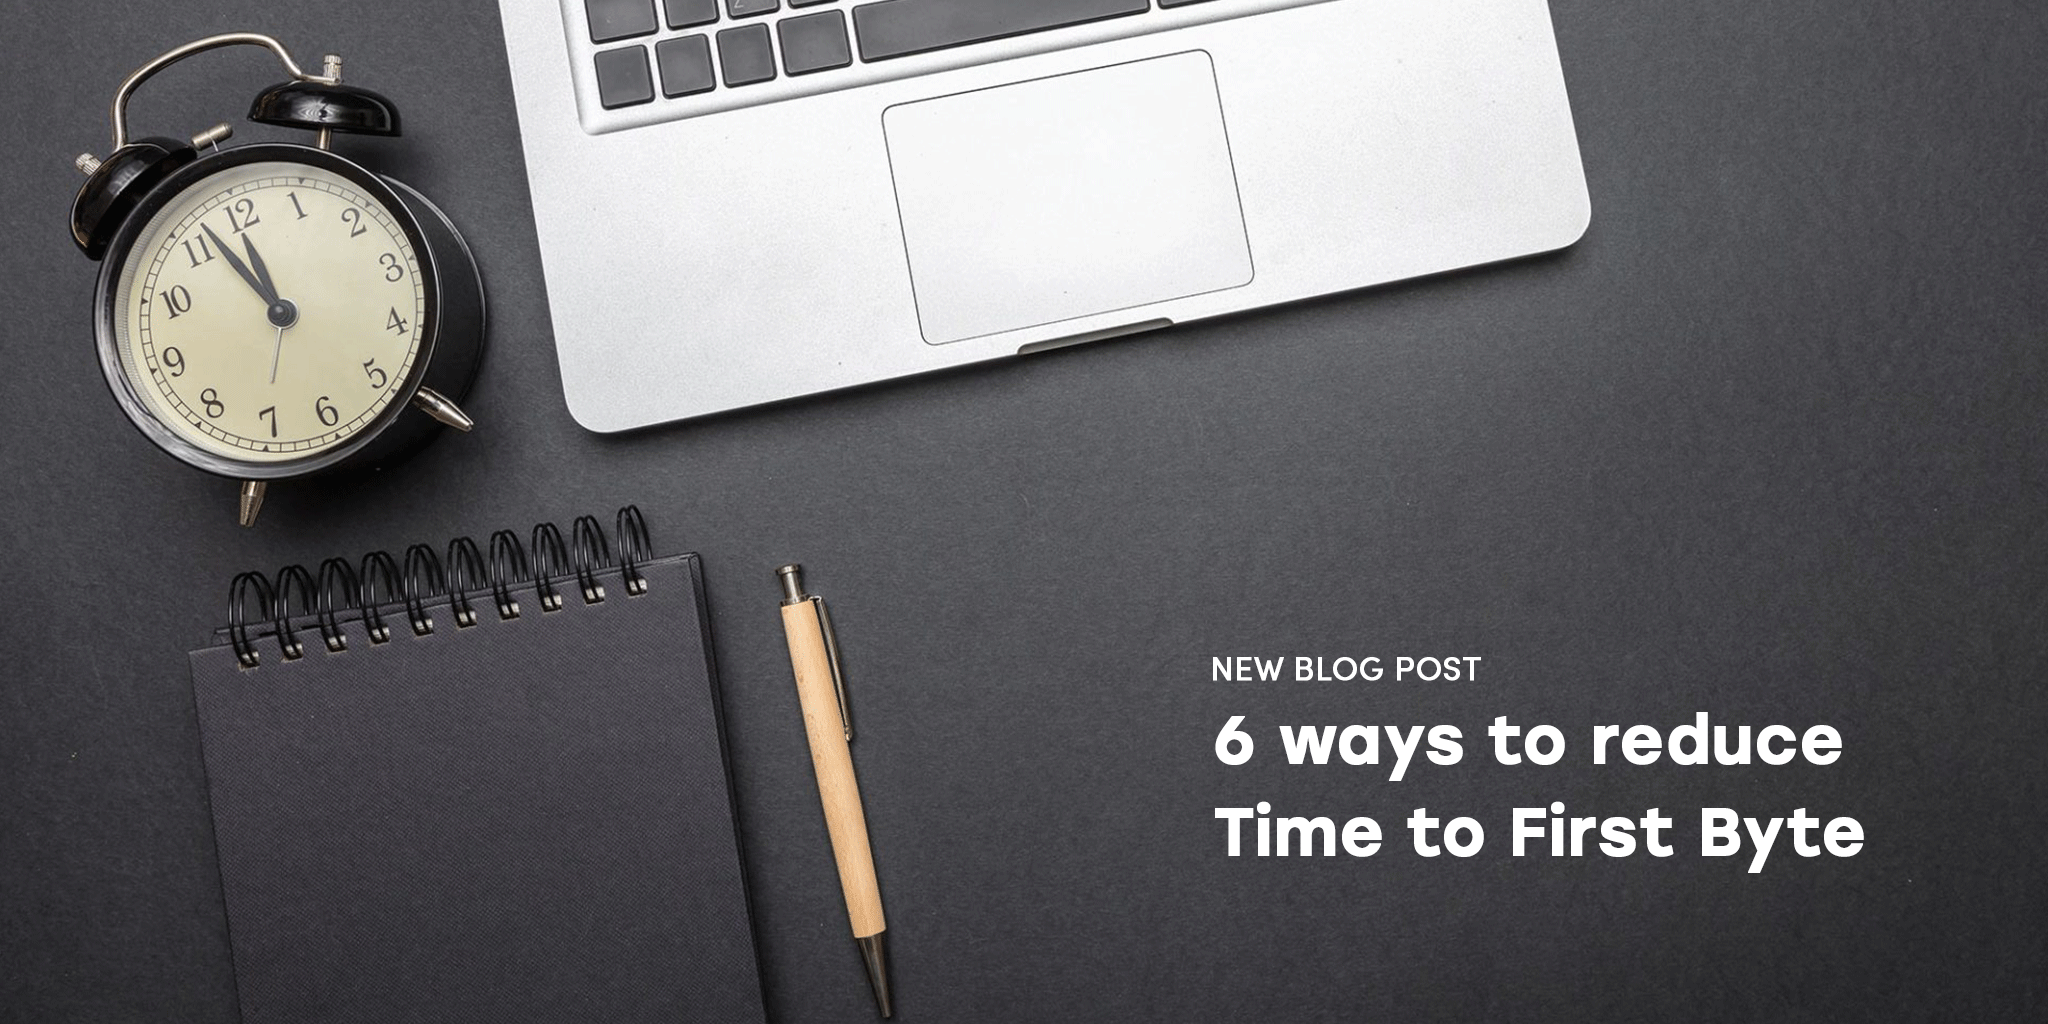 6 ways to reduce Time to First Byte (TTFB) | The Uptrends Blog